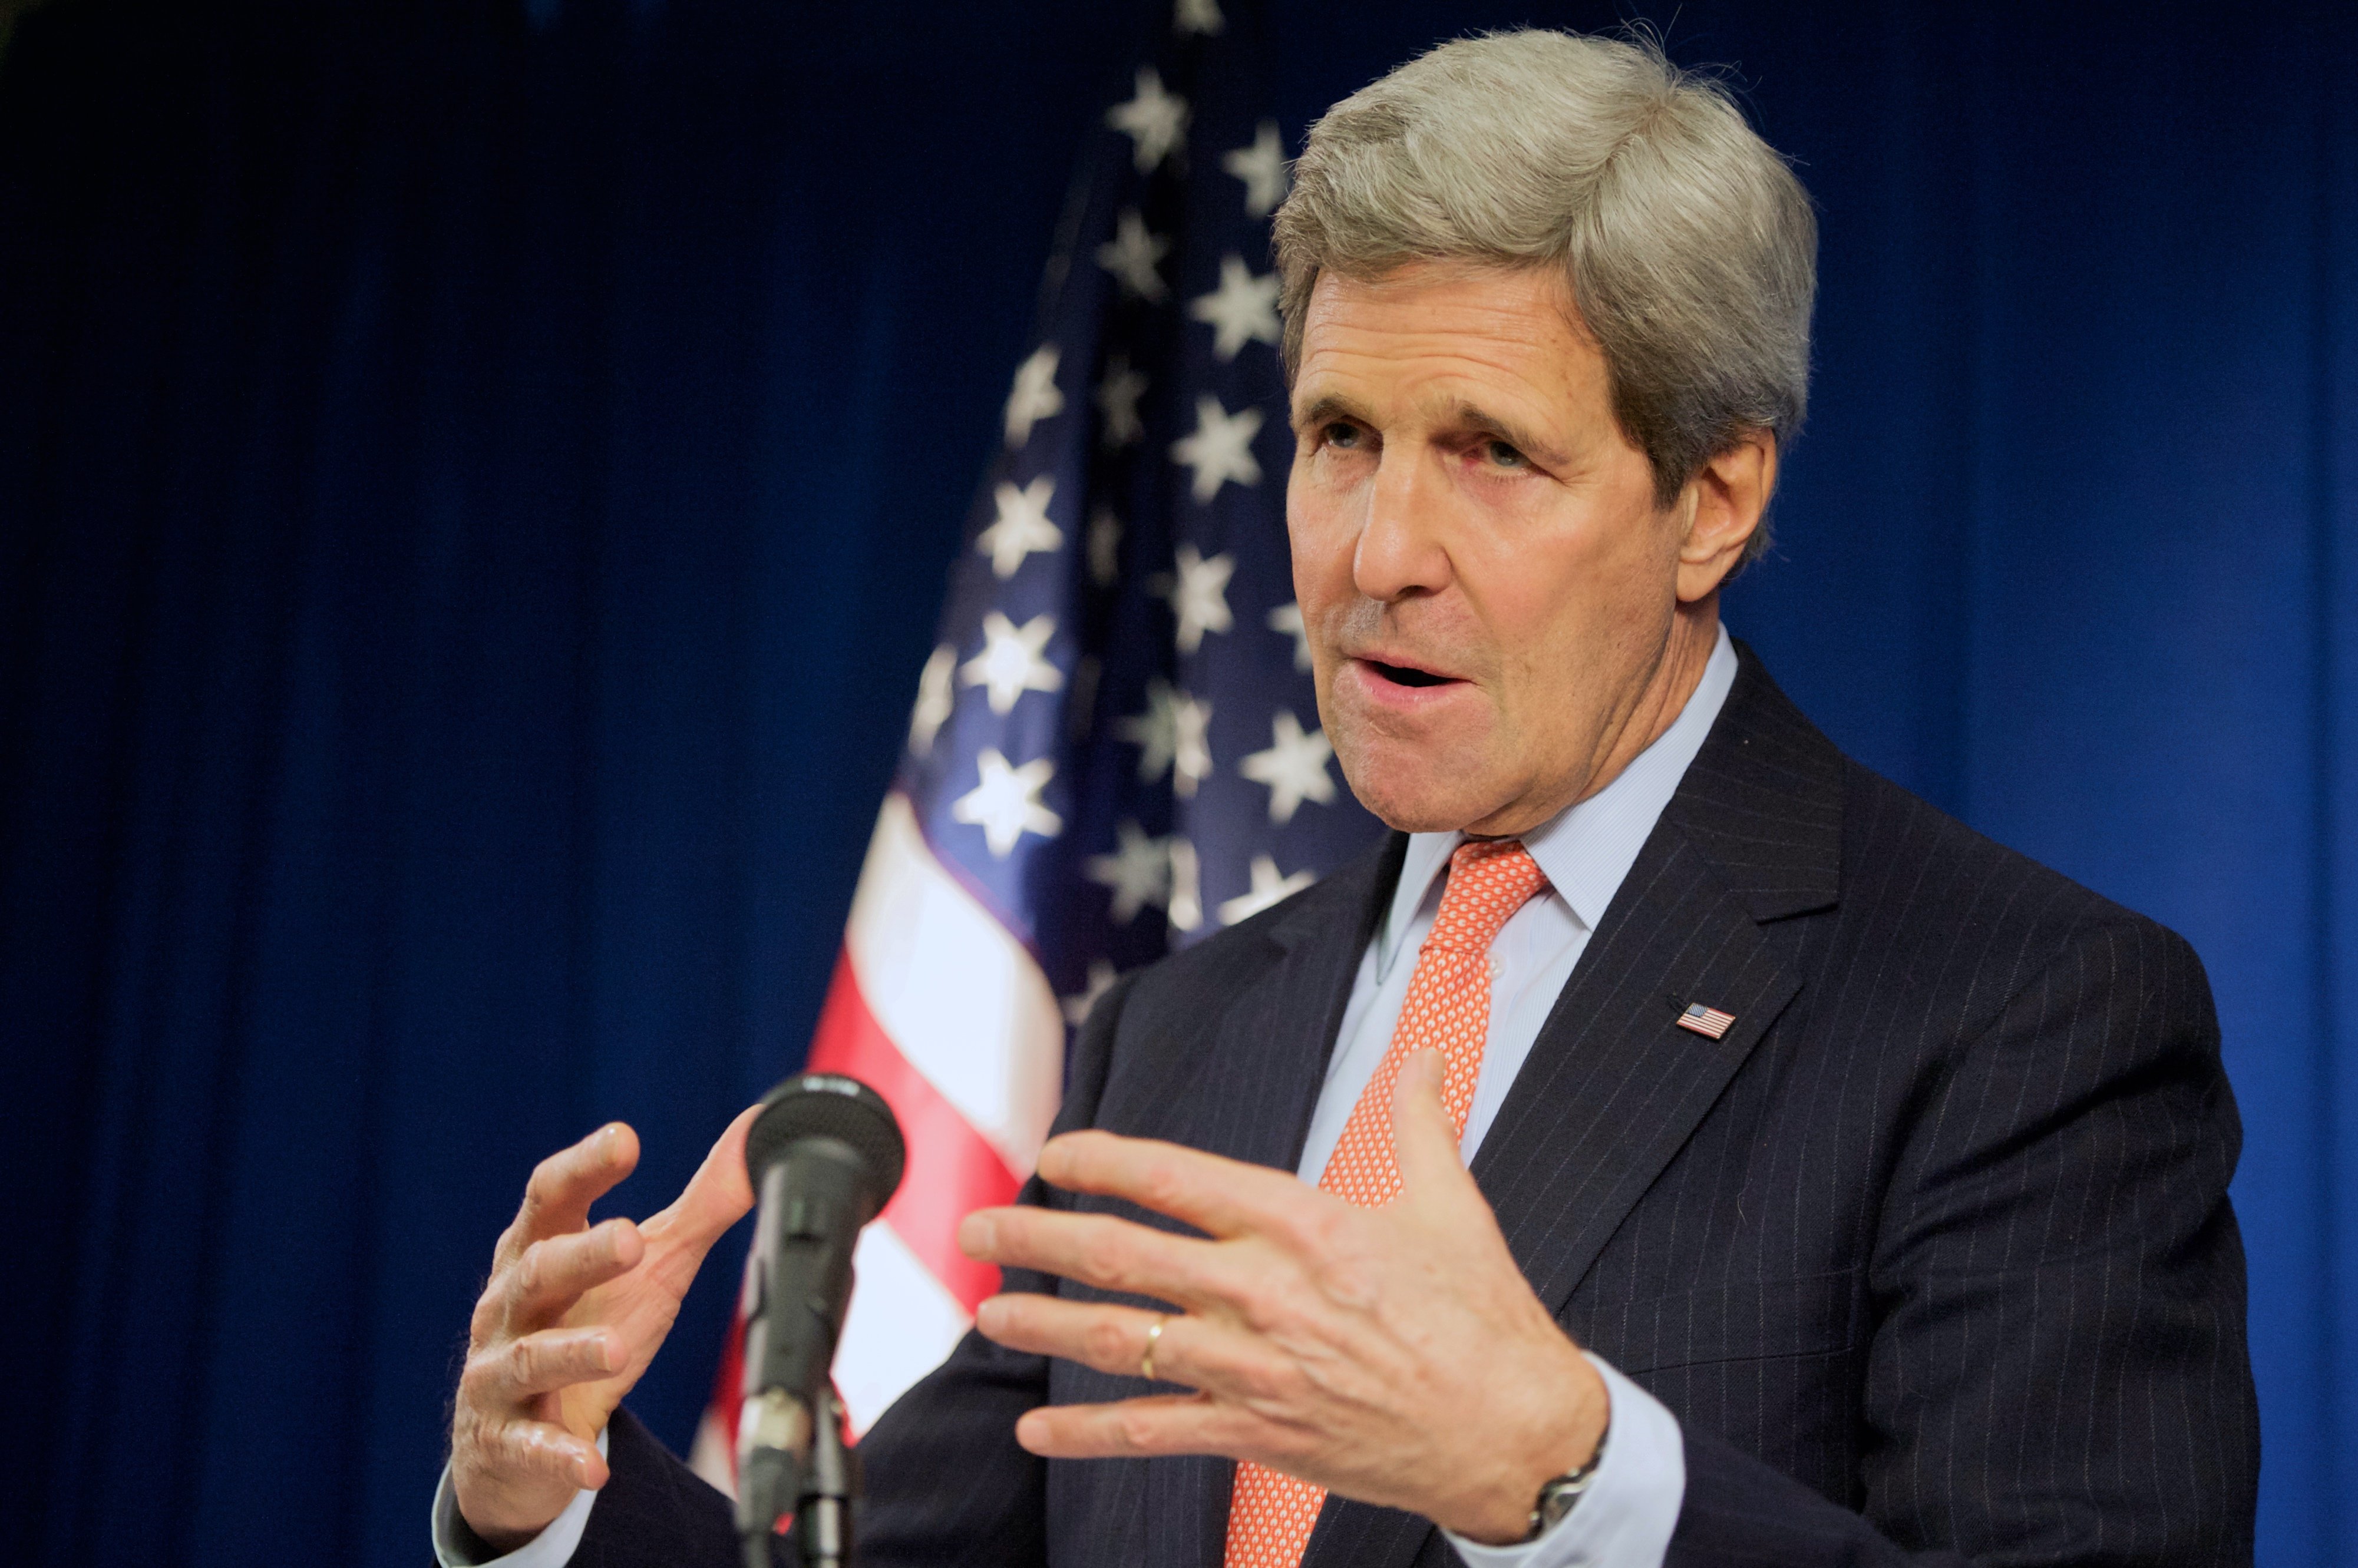 U.S. Secretary of State John Kerry addresses reporters in London, U.K., on February 21, 2015, after meeting with British Foreign Secretary Philip Hammond and hold discussions focused on the anti-ISIS coalition and the situation in Ukraine.